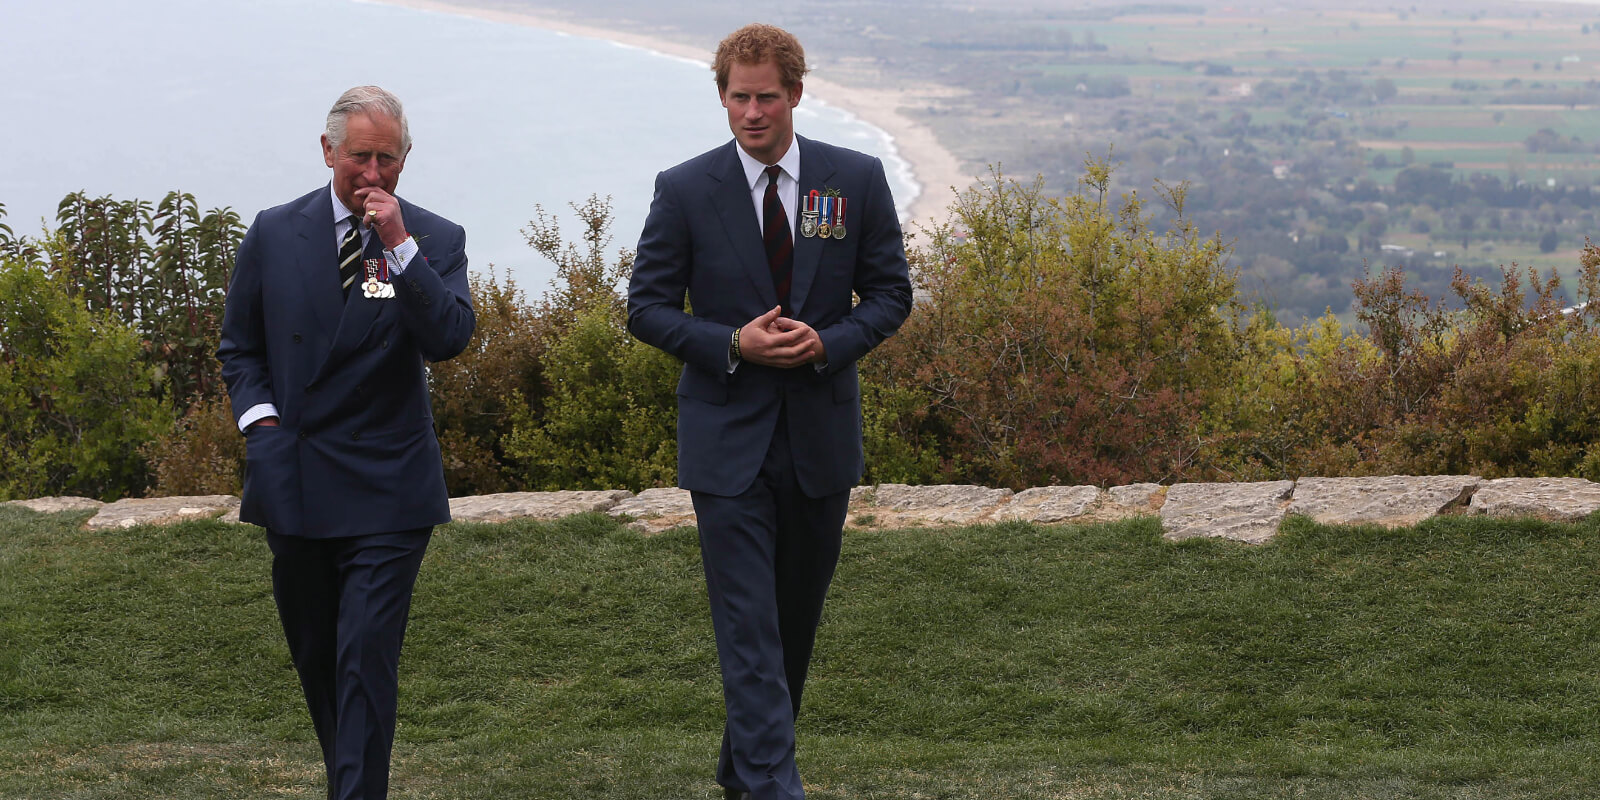 Prince Harry chats with Prince Charles, Prince of Wales during a visit to The Nek, a narrow stretch of ridge in the Anzac battlefield on the Gallipoli Peninsula, in 2015.